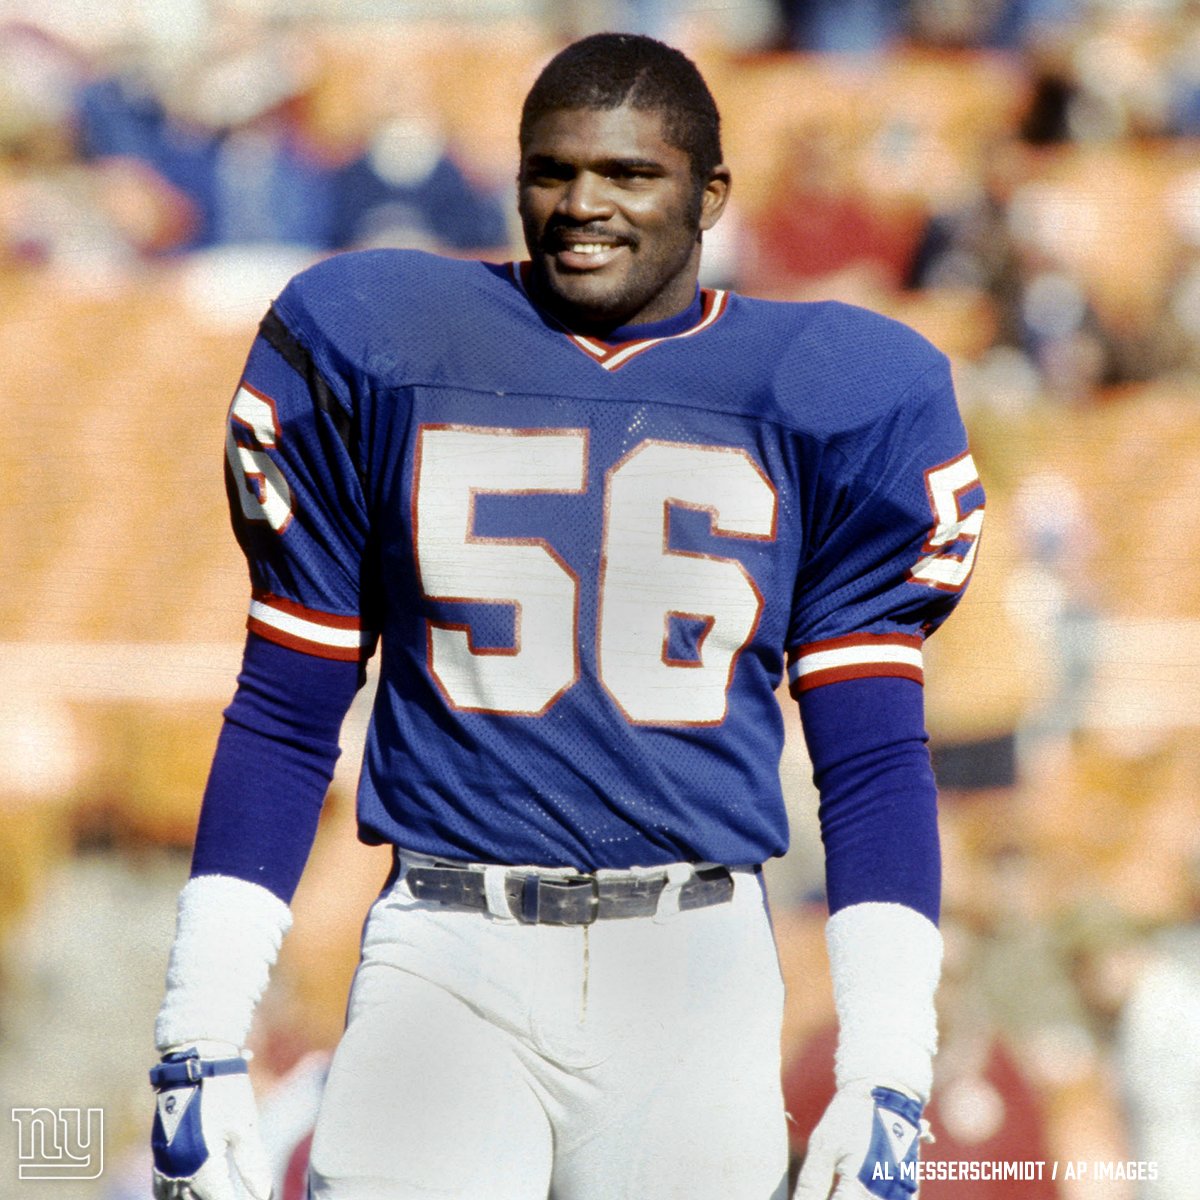 Happy birthday to the last defensive player to win MVP - LT, Lawrence Taylor.

(via 